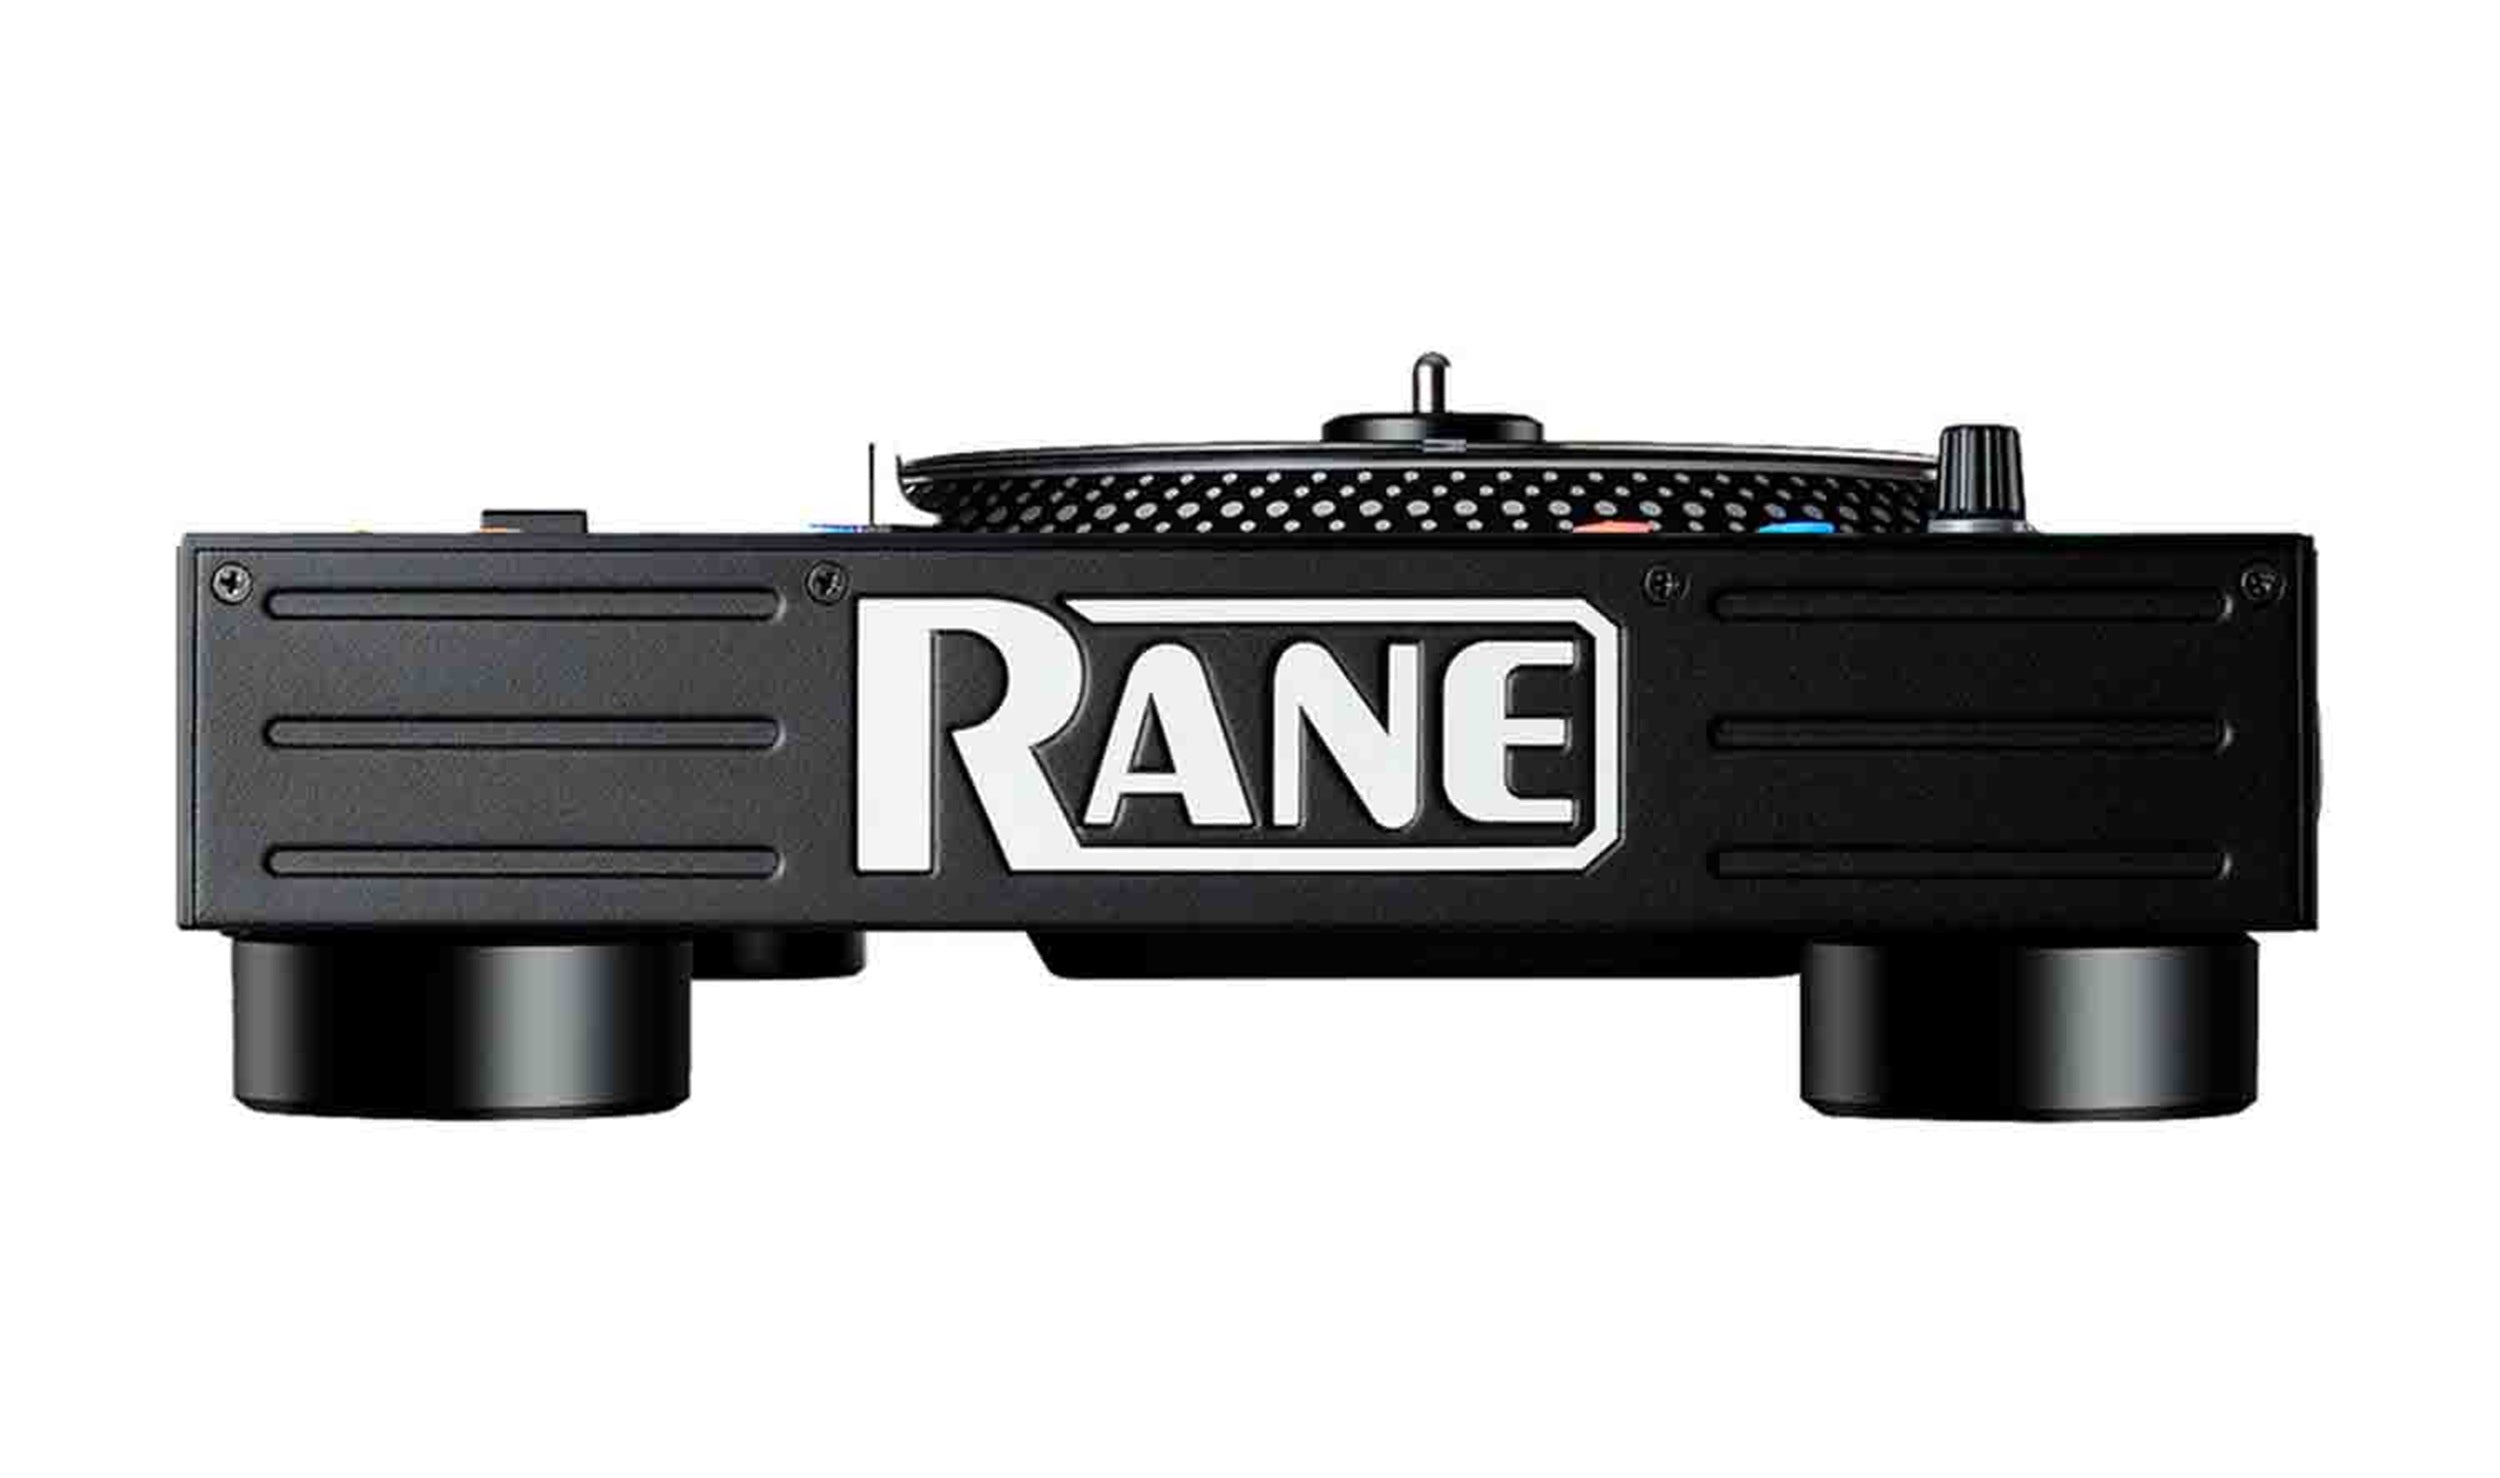 OPEN BOX: RANE ONE 2-Channel DJ Controller - Complete DJ Set and DJ Controller for Serato DJ with Integrated DJ Mixer, Motorized Platters and Serato DJ Pro Included by RANE DJ